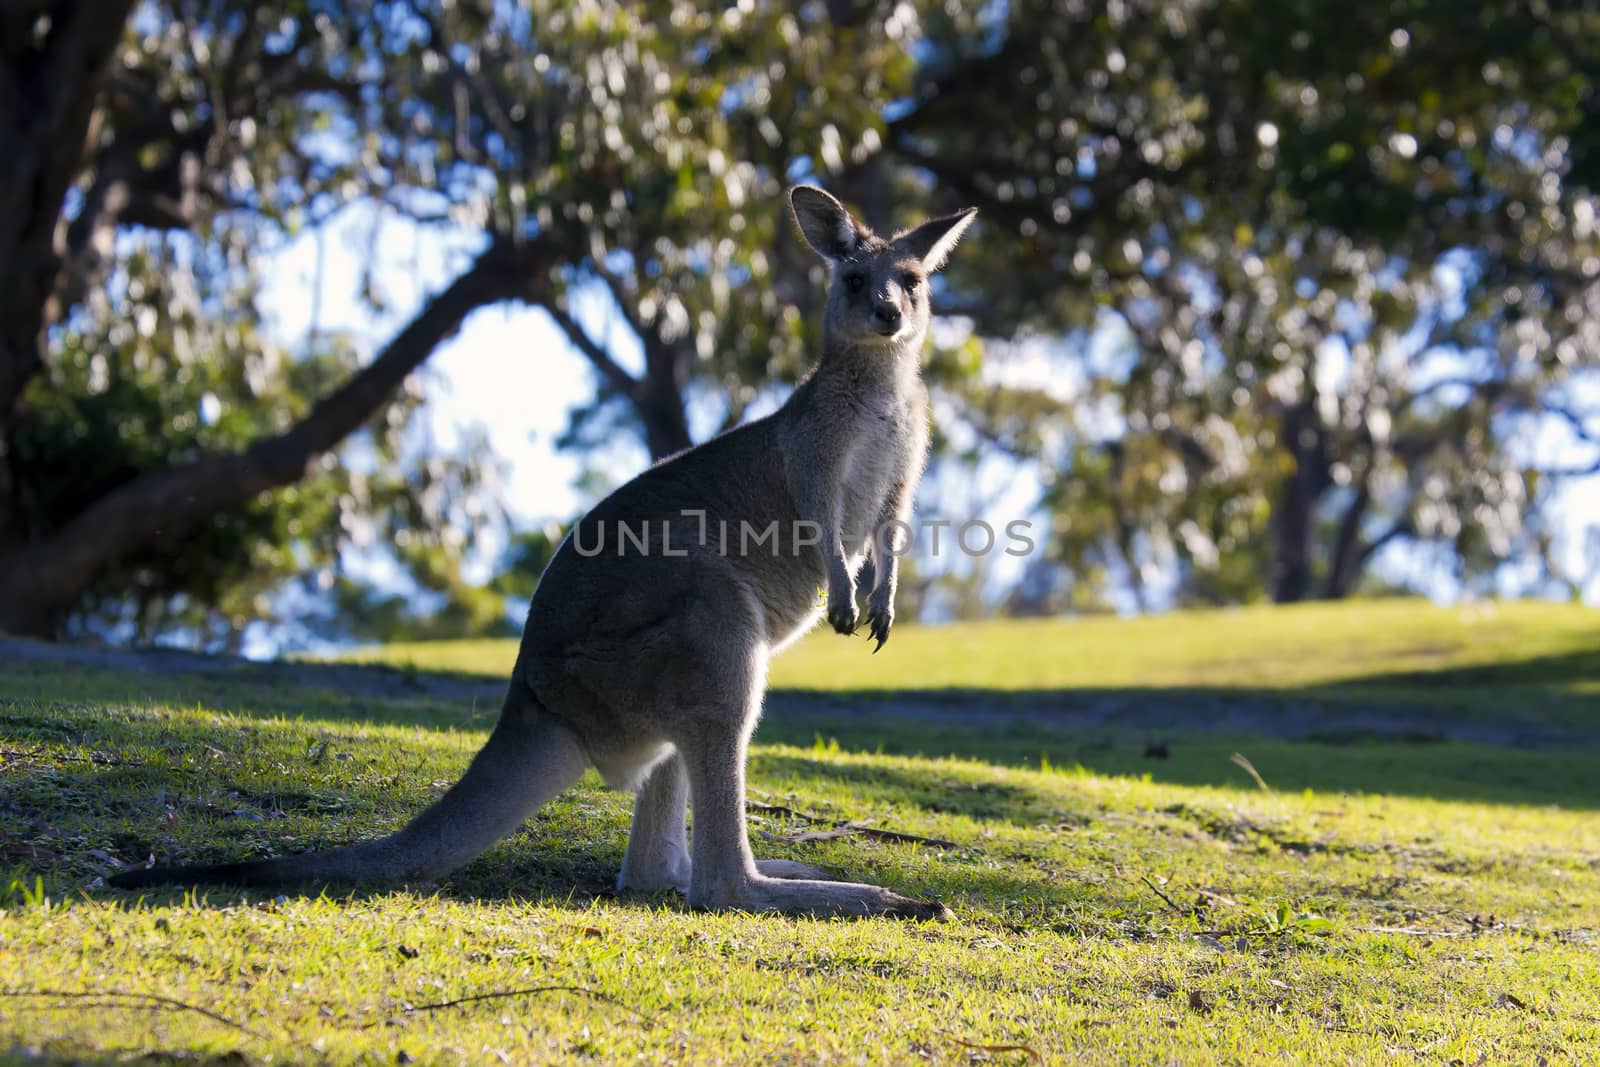 A closeup of a kangaroo standing in the grass by definitearts